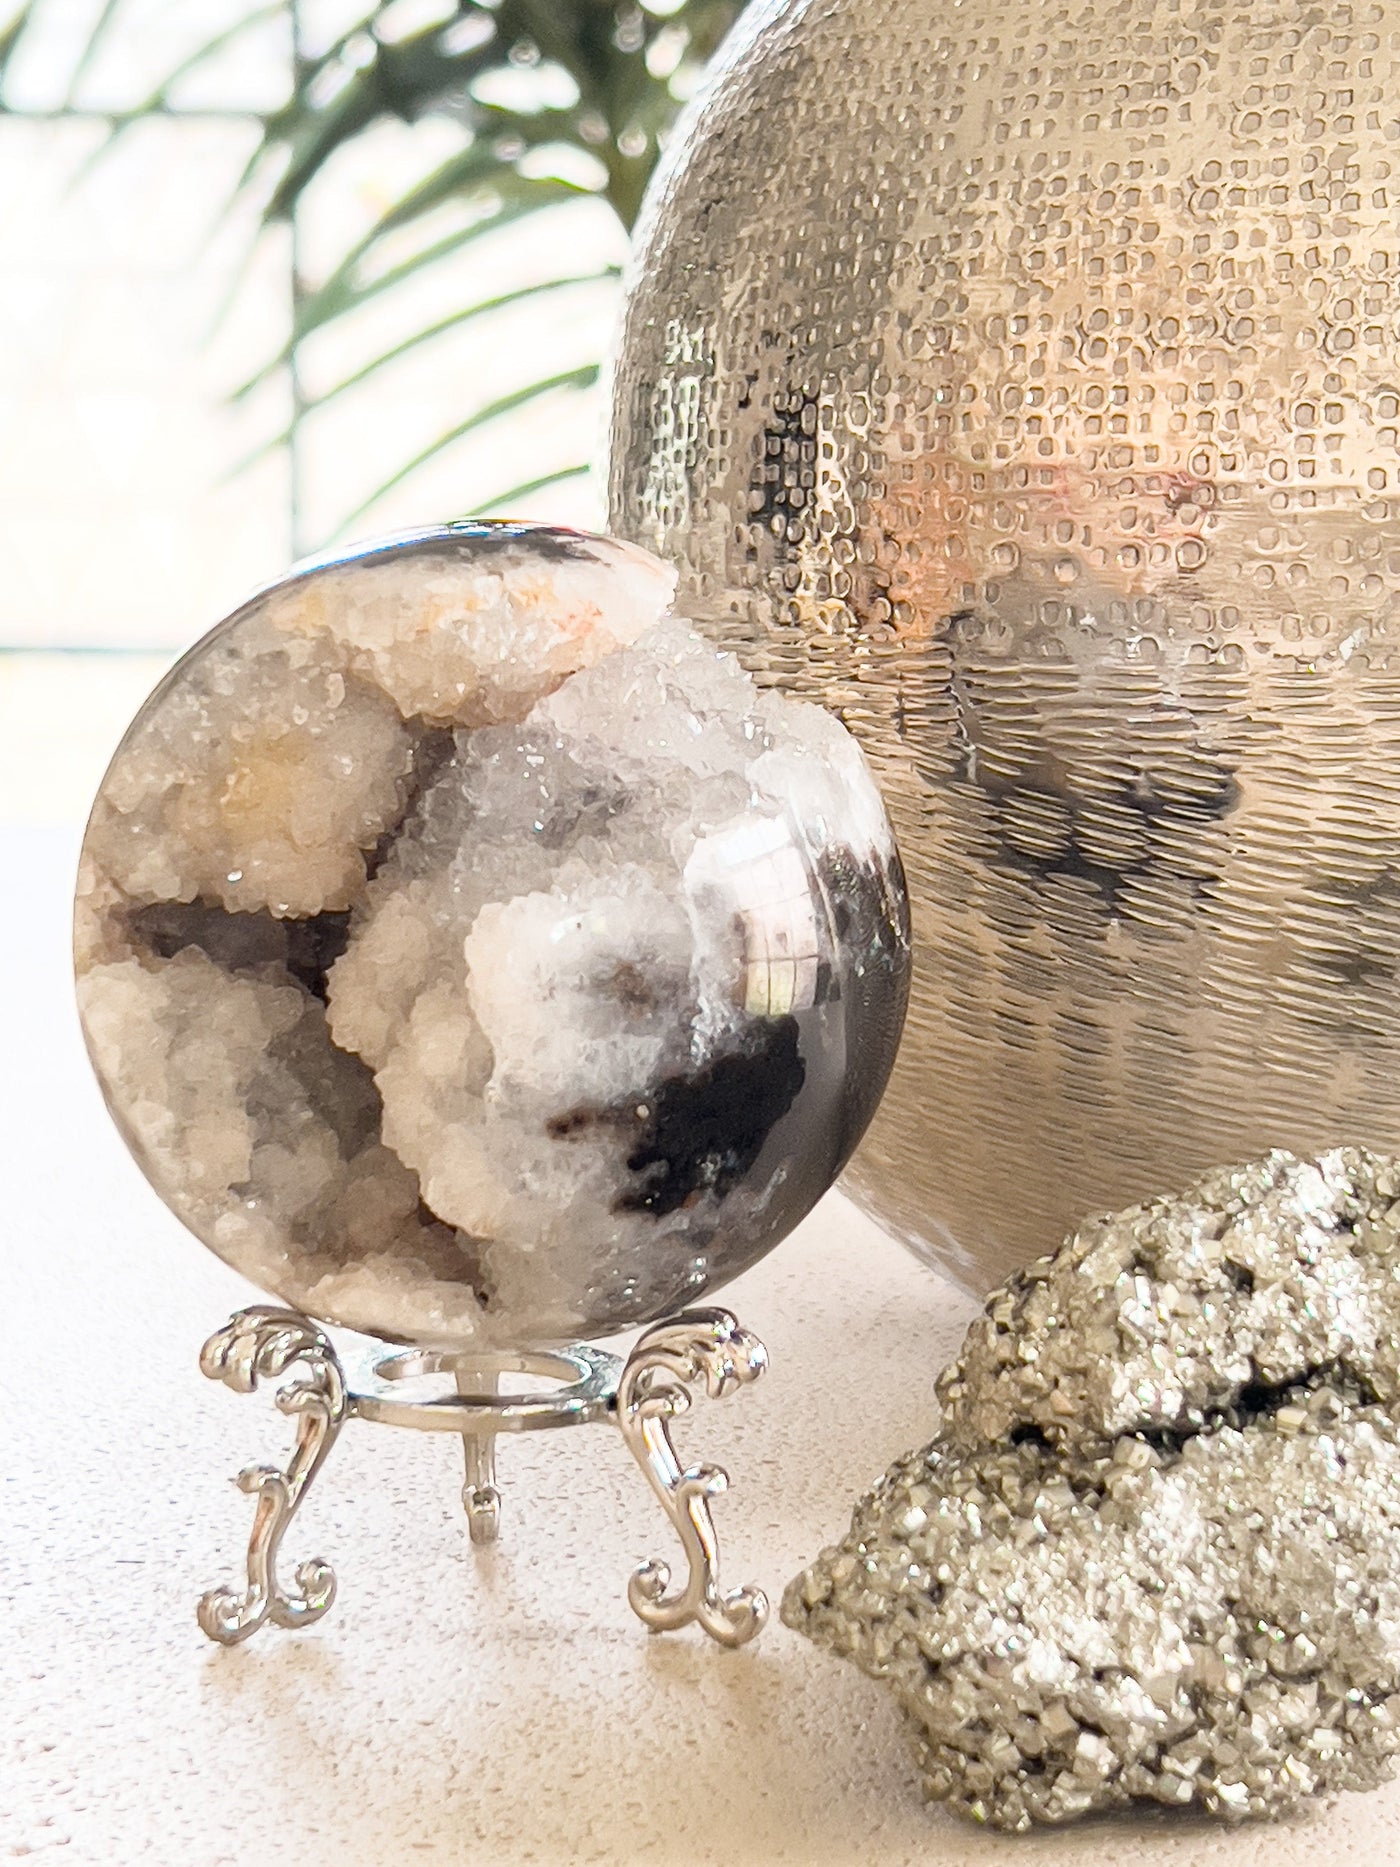 SPHALERITE SUGAR BALL DRUZY AGATE SPHERE (MEDIUM) Revive In Style Vintage Furniture Painted Refinished Redesign Beautiful One of a Kind Artistic Antique Unique Home Decor Interior Design French Country Shabby Chic Cottage Farmhouse Grandmillenial Coastal Chalk Paint Metallic Glam Eclectic Quality Dovetailed Rustic Furniture Painter Pinterest Bedroom Living Room Entryway Kitchen Home Trends House Styles Decorating ideas